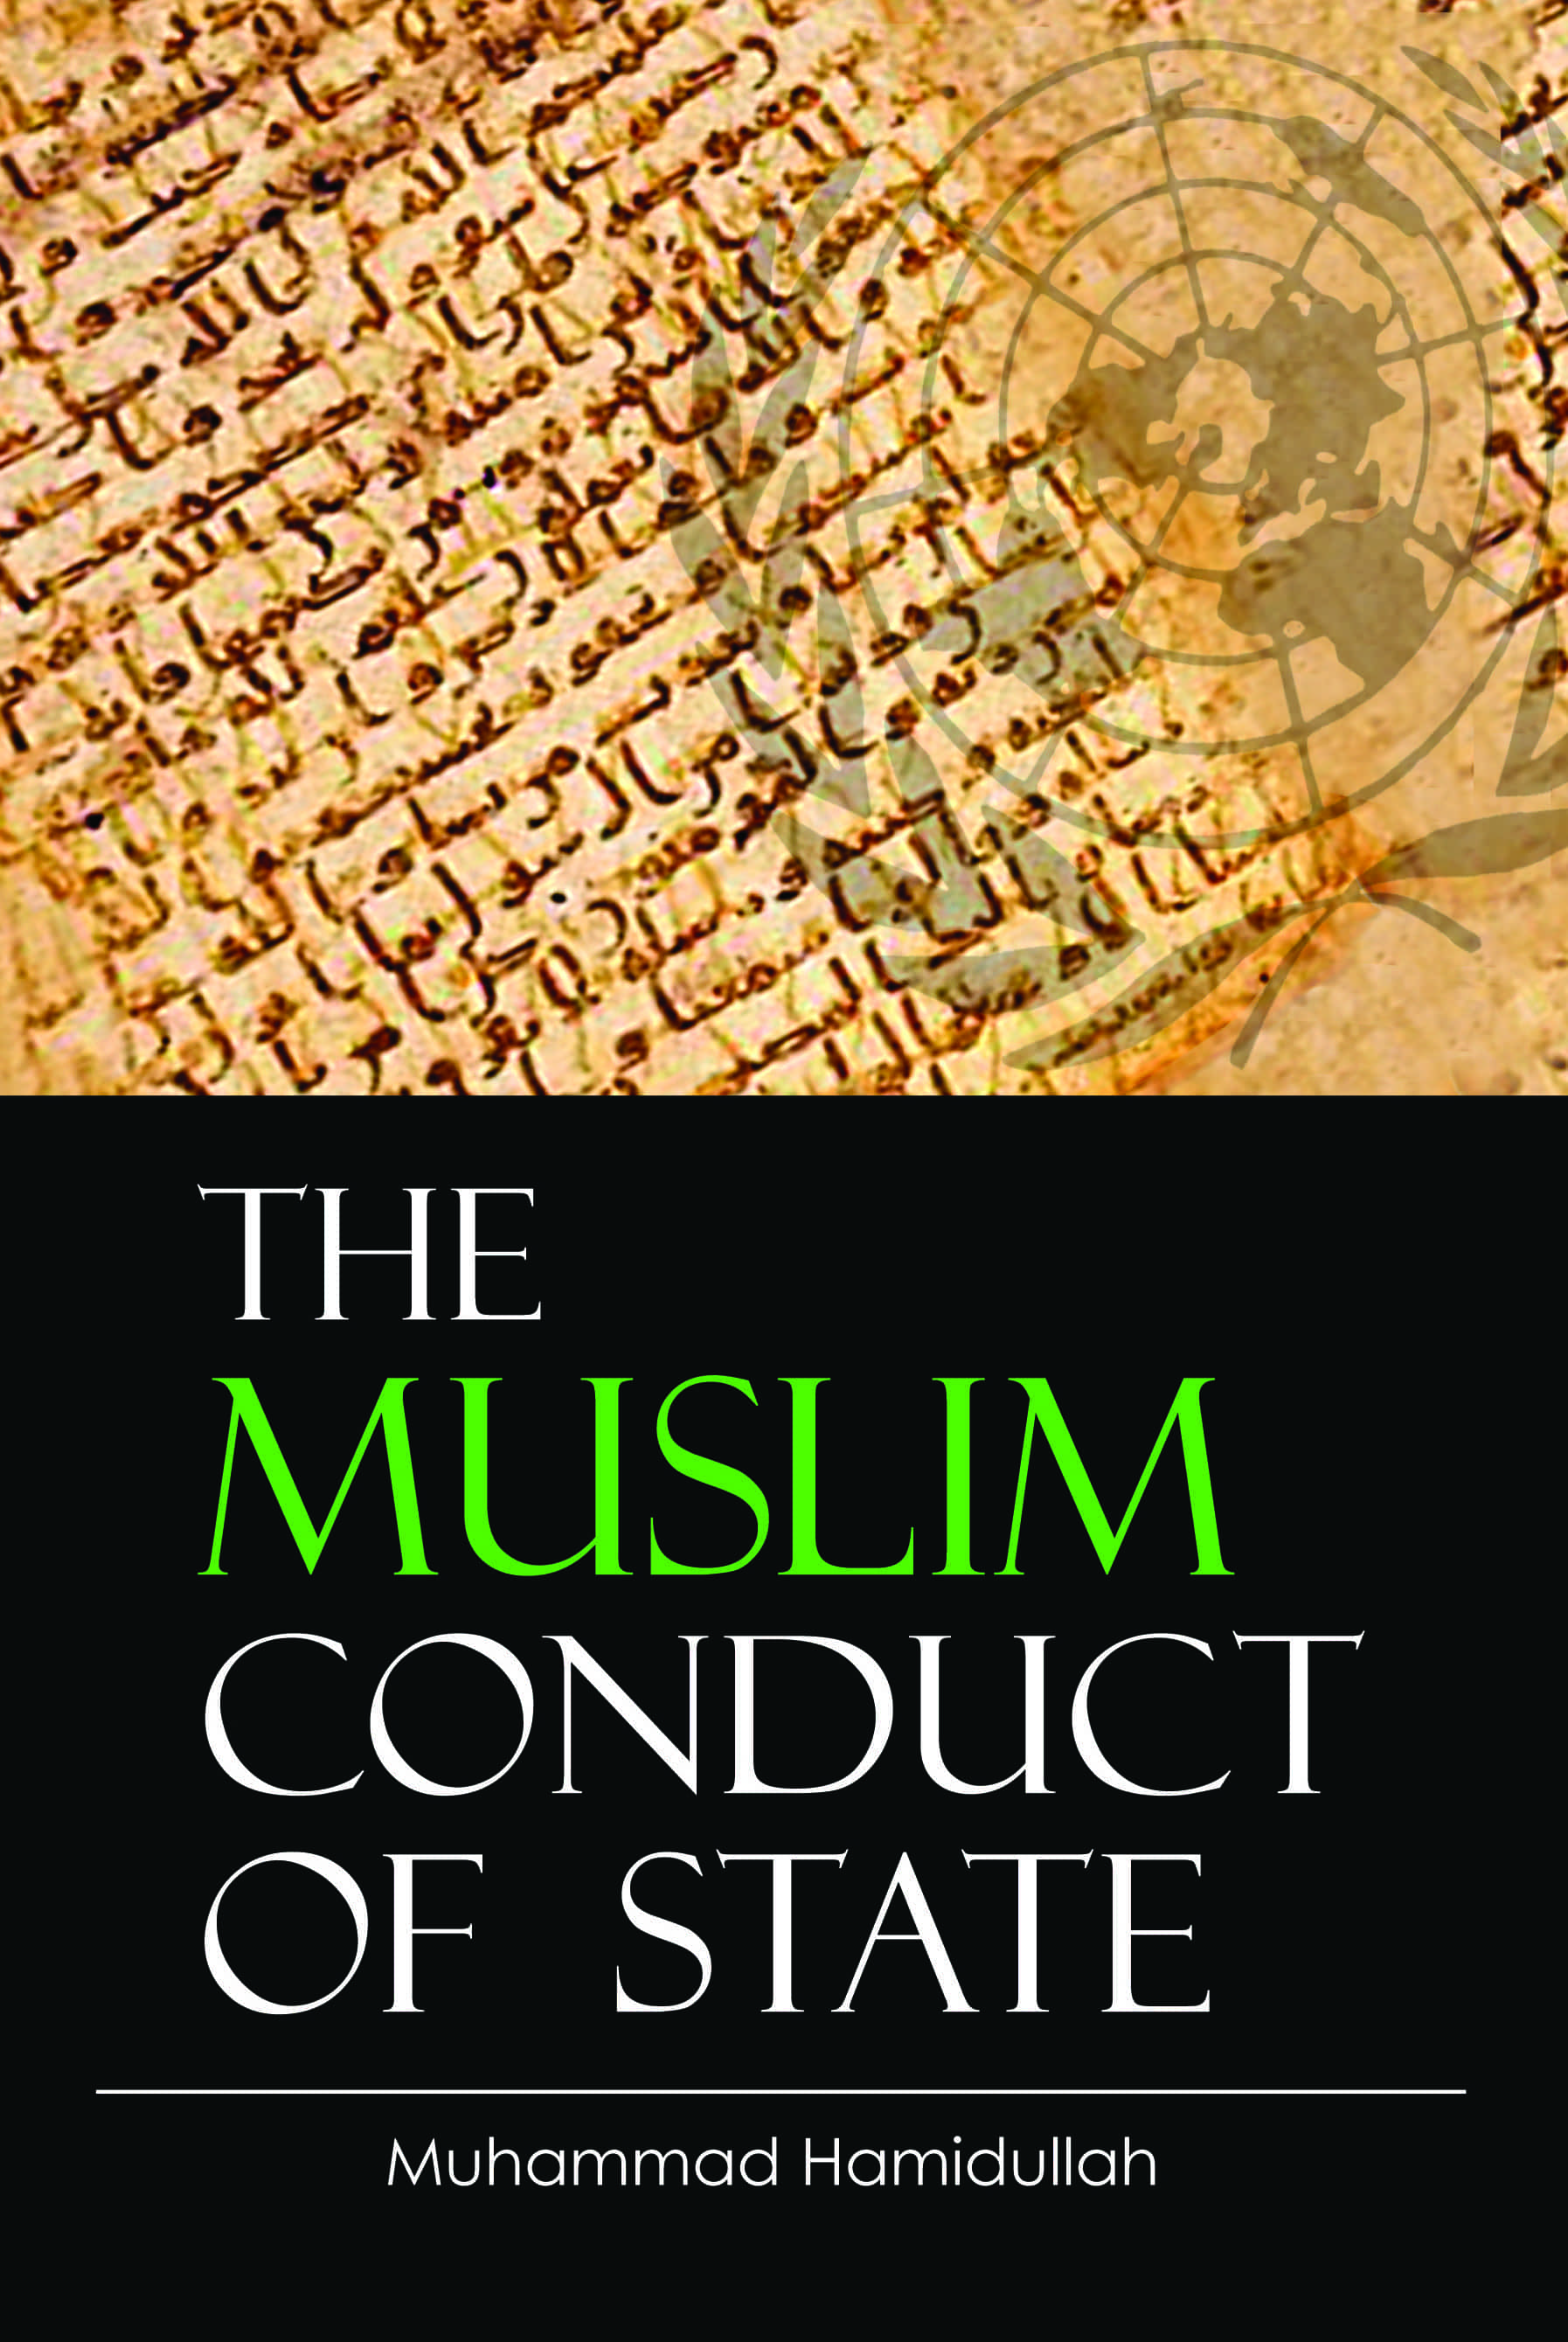 The Muslim Conduct of State